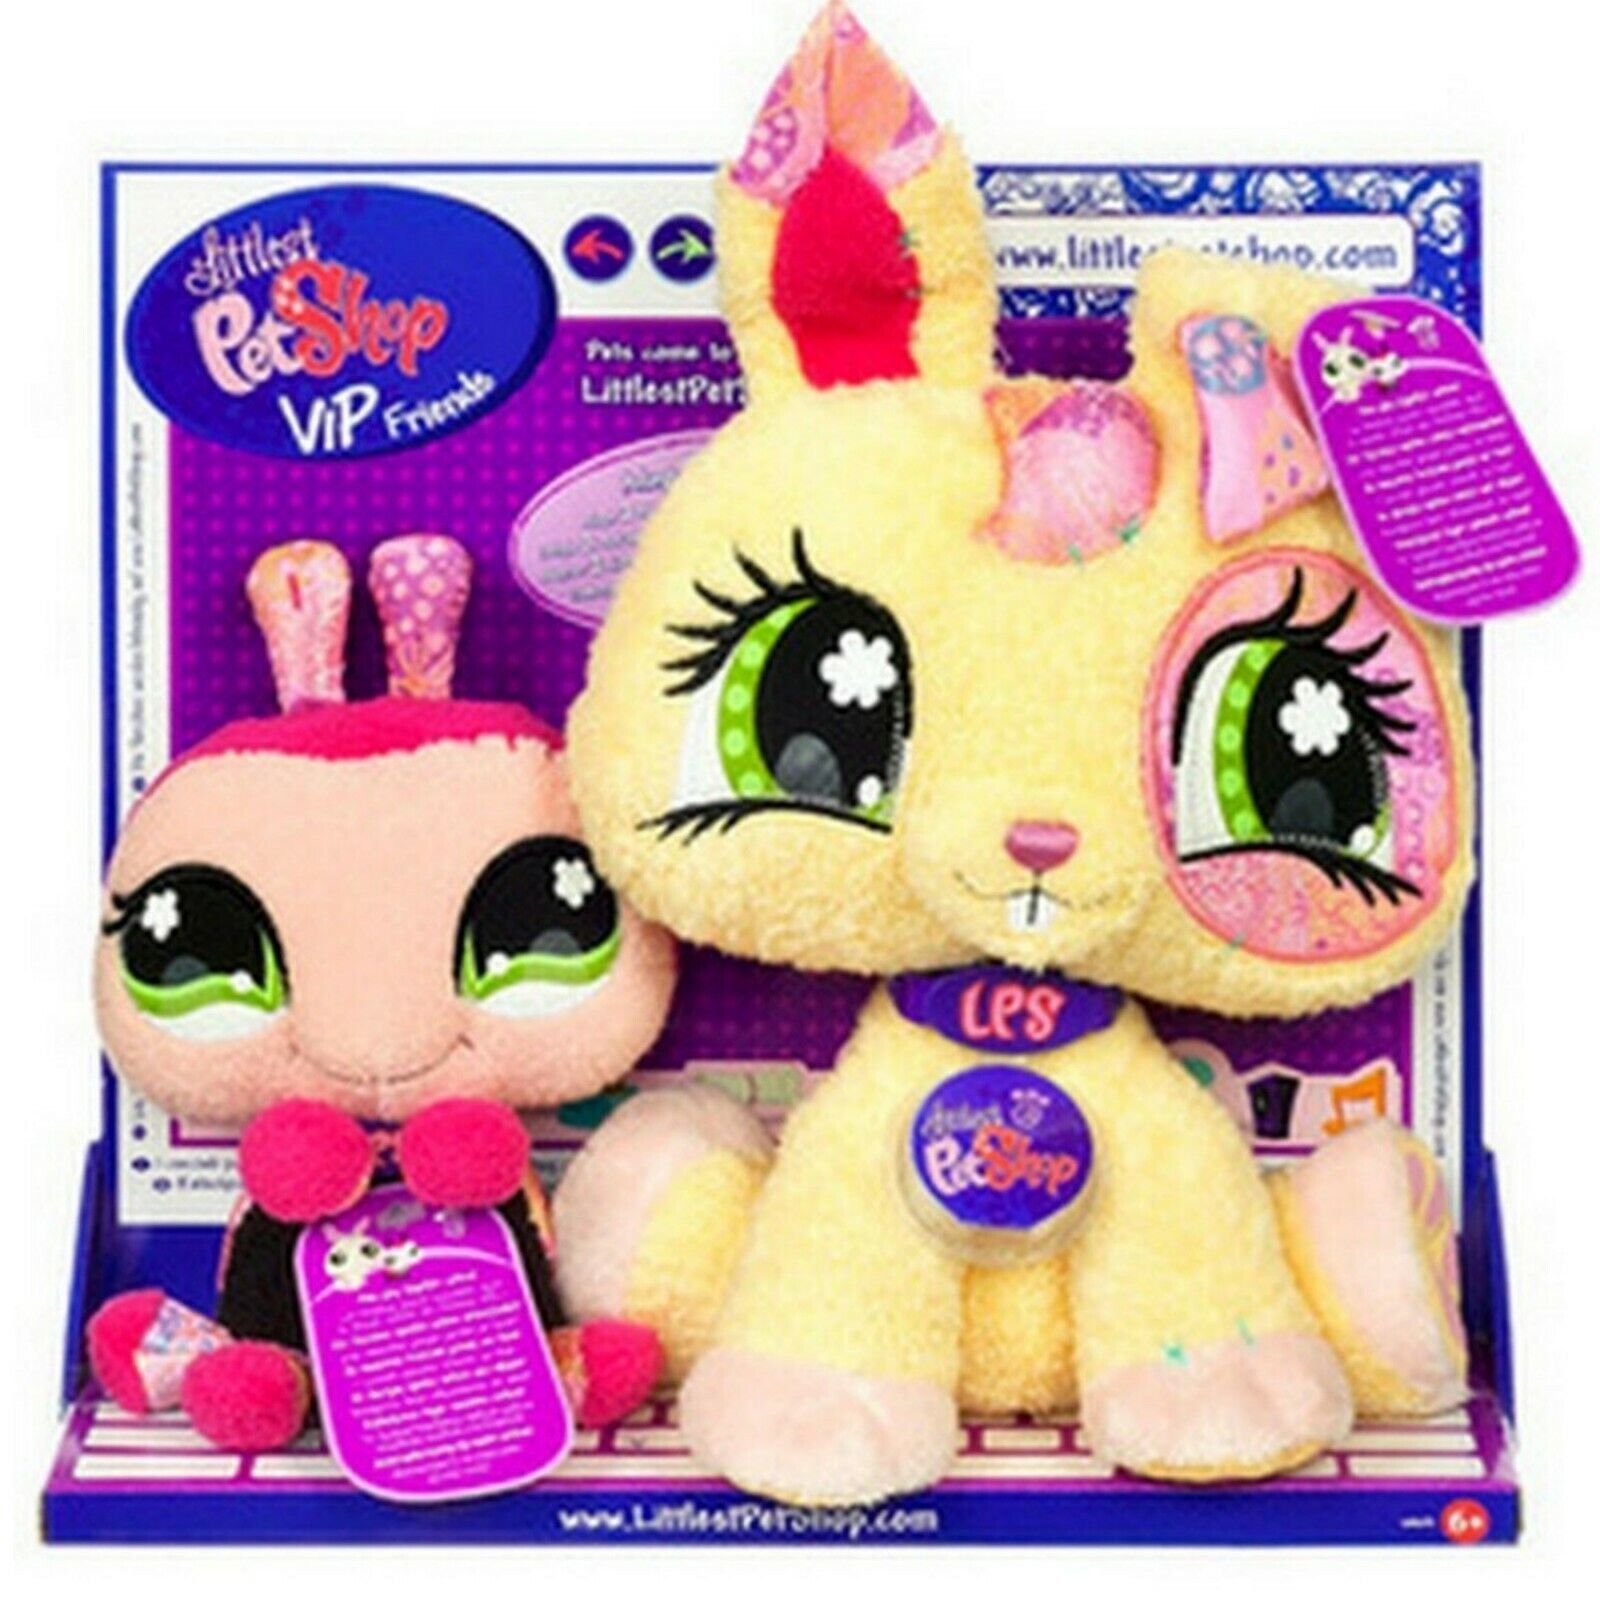 RARE NEW Ladybug and Bunny Pair of VIP Friends Littlest Pet Shop - $69.99